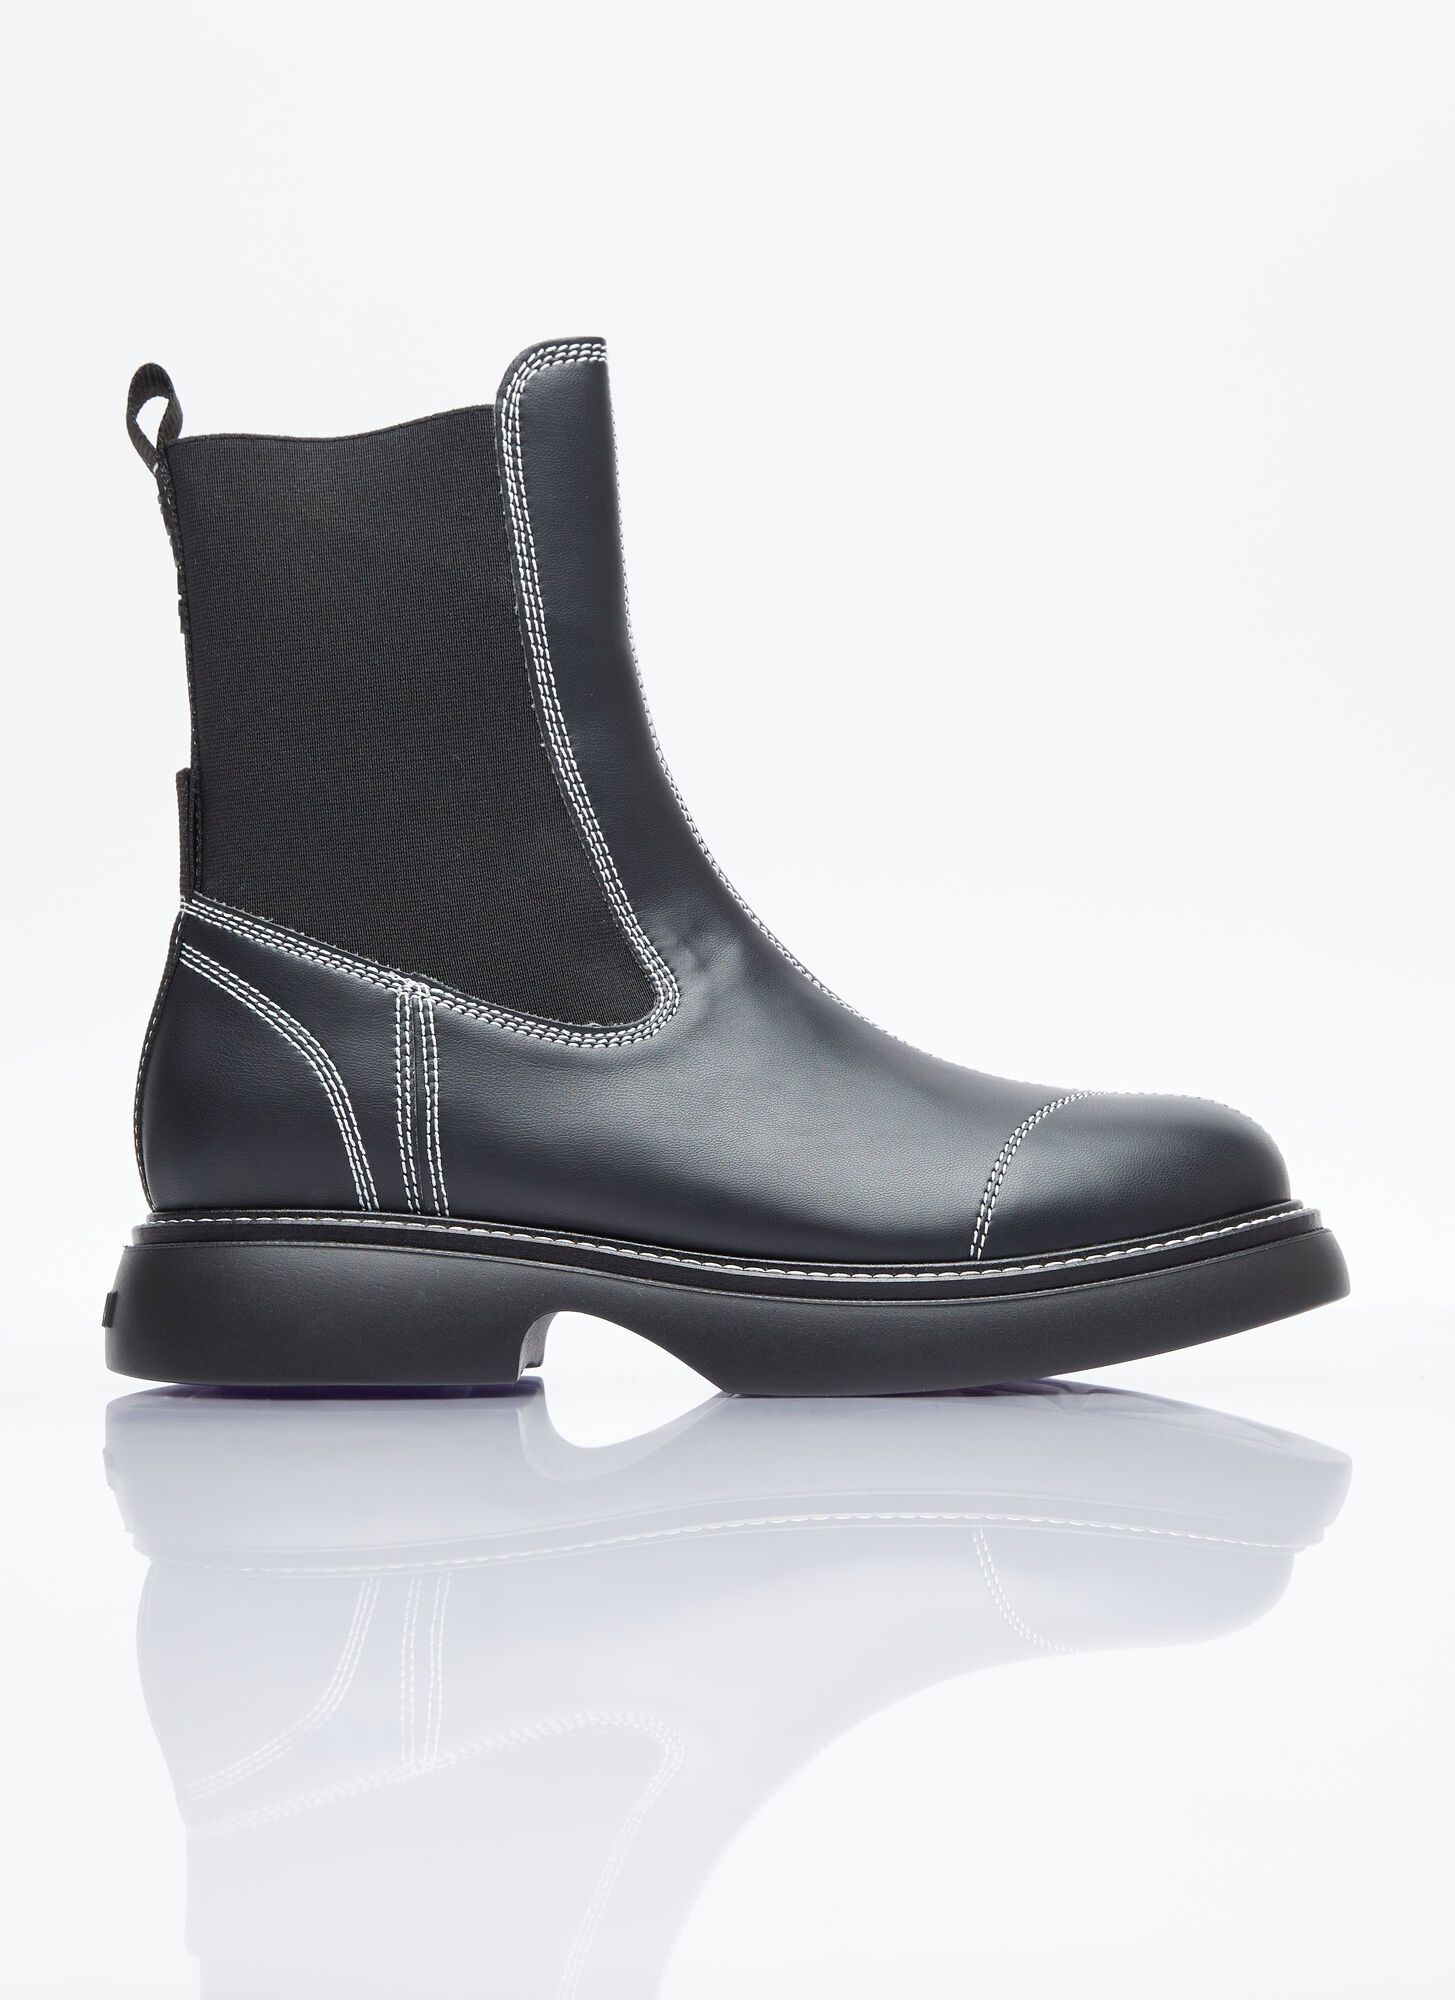 Shop Ganni Everyday Mid Chelsea Boots In Black